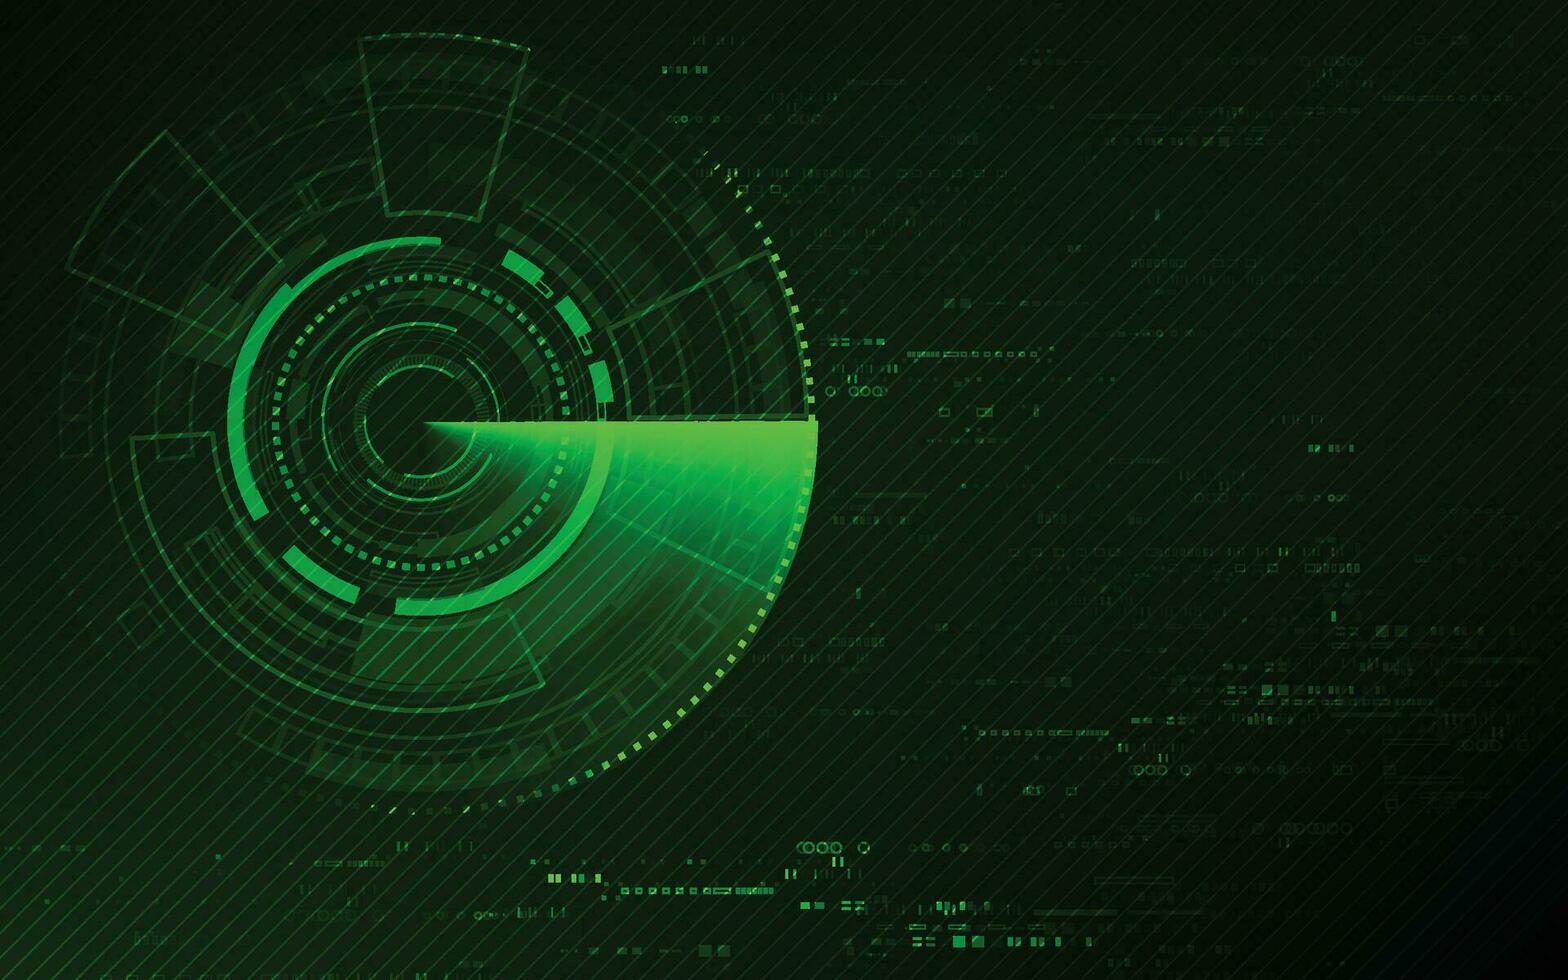 Radar scan searching abstract technology background vector